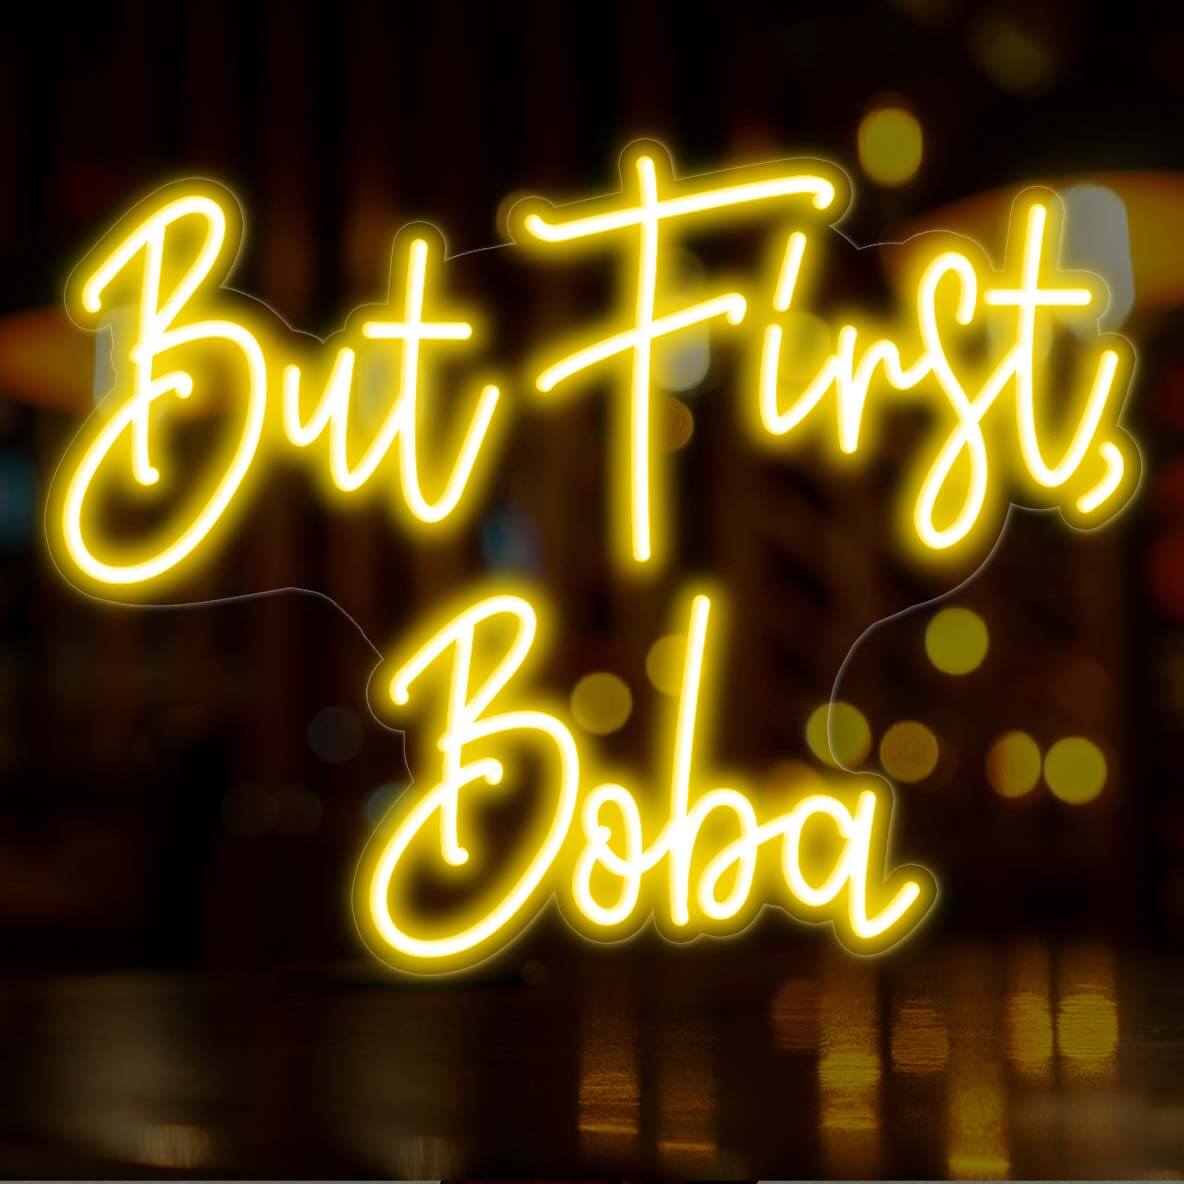 But First Boba Neon Sign Led Light yellow